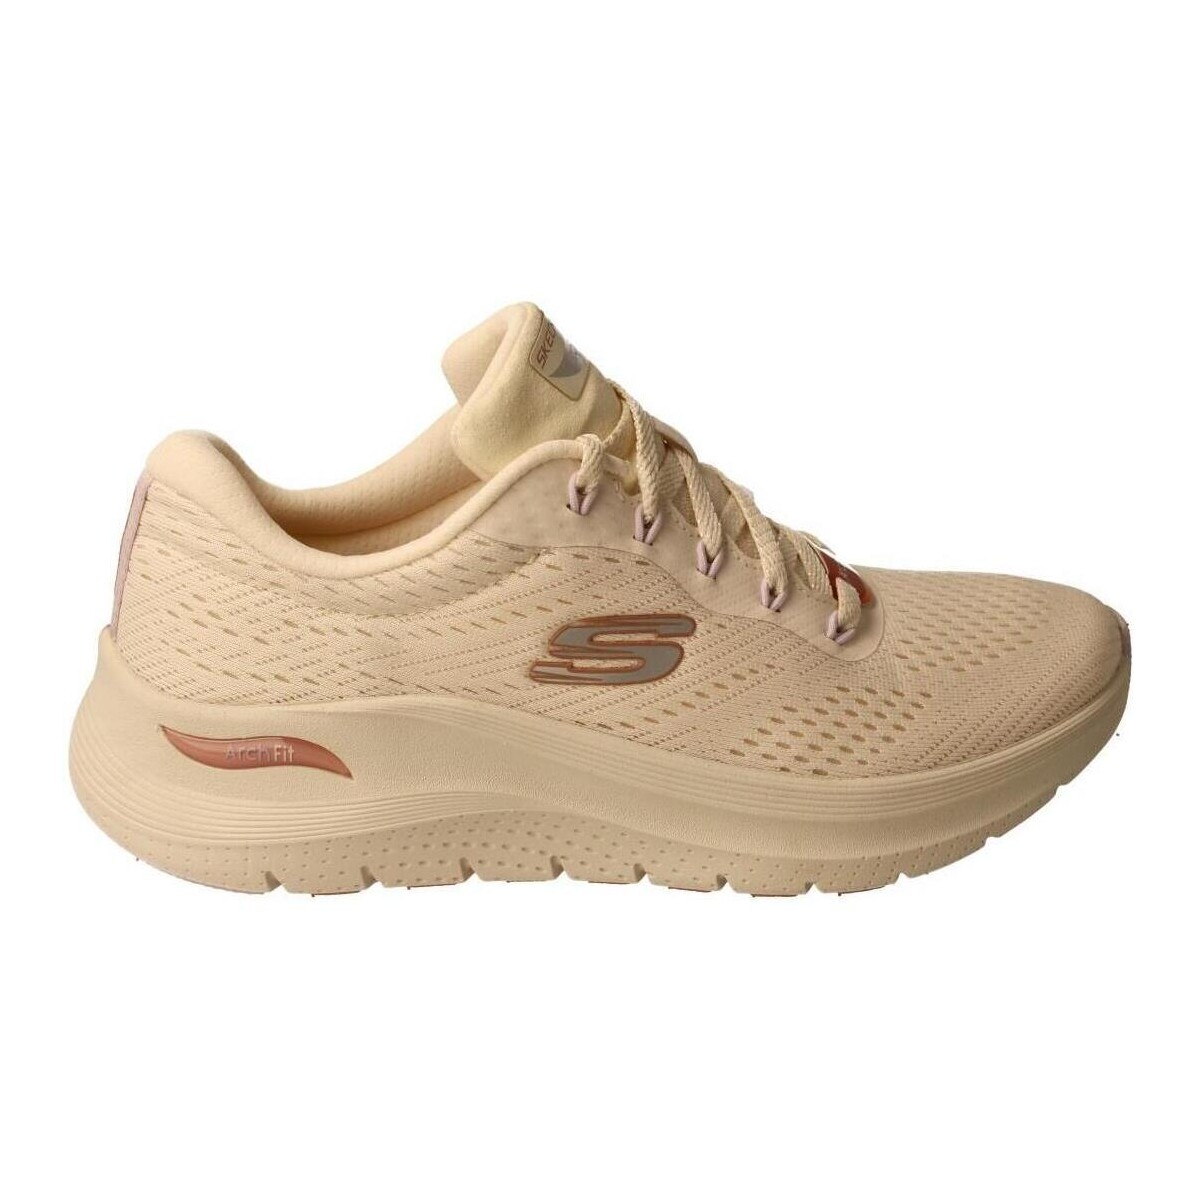 Sapatos Mulher Sapatilhas Skechers  Bege